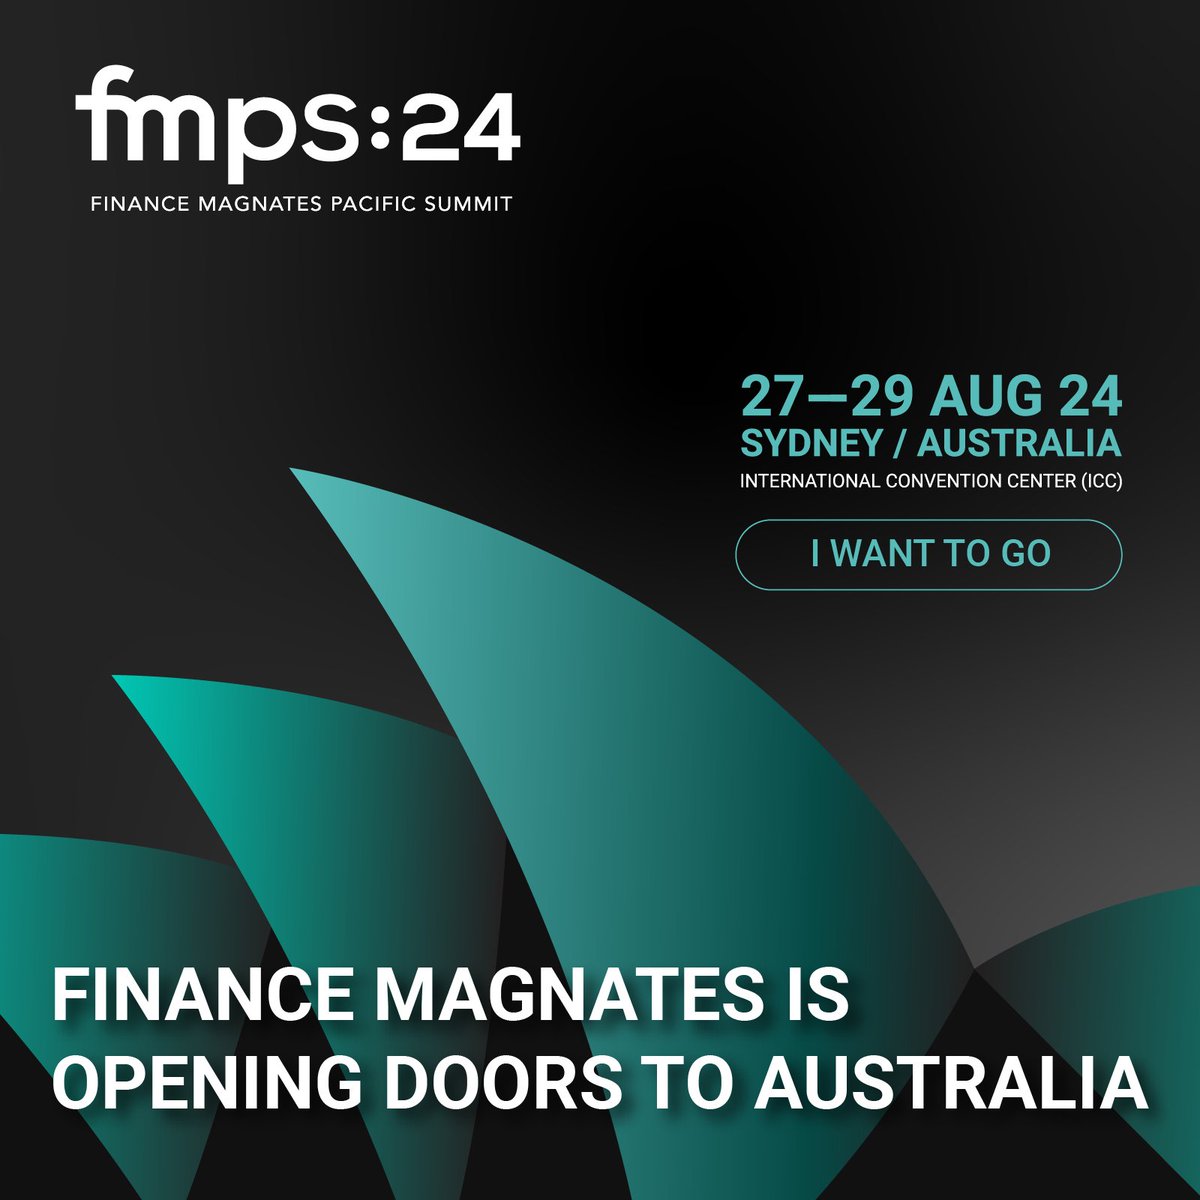 🌏 Get ready for FMPS:24 – the next big event in APAC! 🚀 Join us from August 27-29 to kick off Finance Magnates Pacific Summit (FMPS:24) in Sydney, Australia. Interested in attending? Register here 🔗 bit.ly/4aM4bI2 #fmps #fmps24 #fmevents